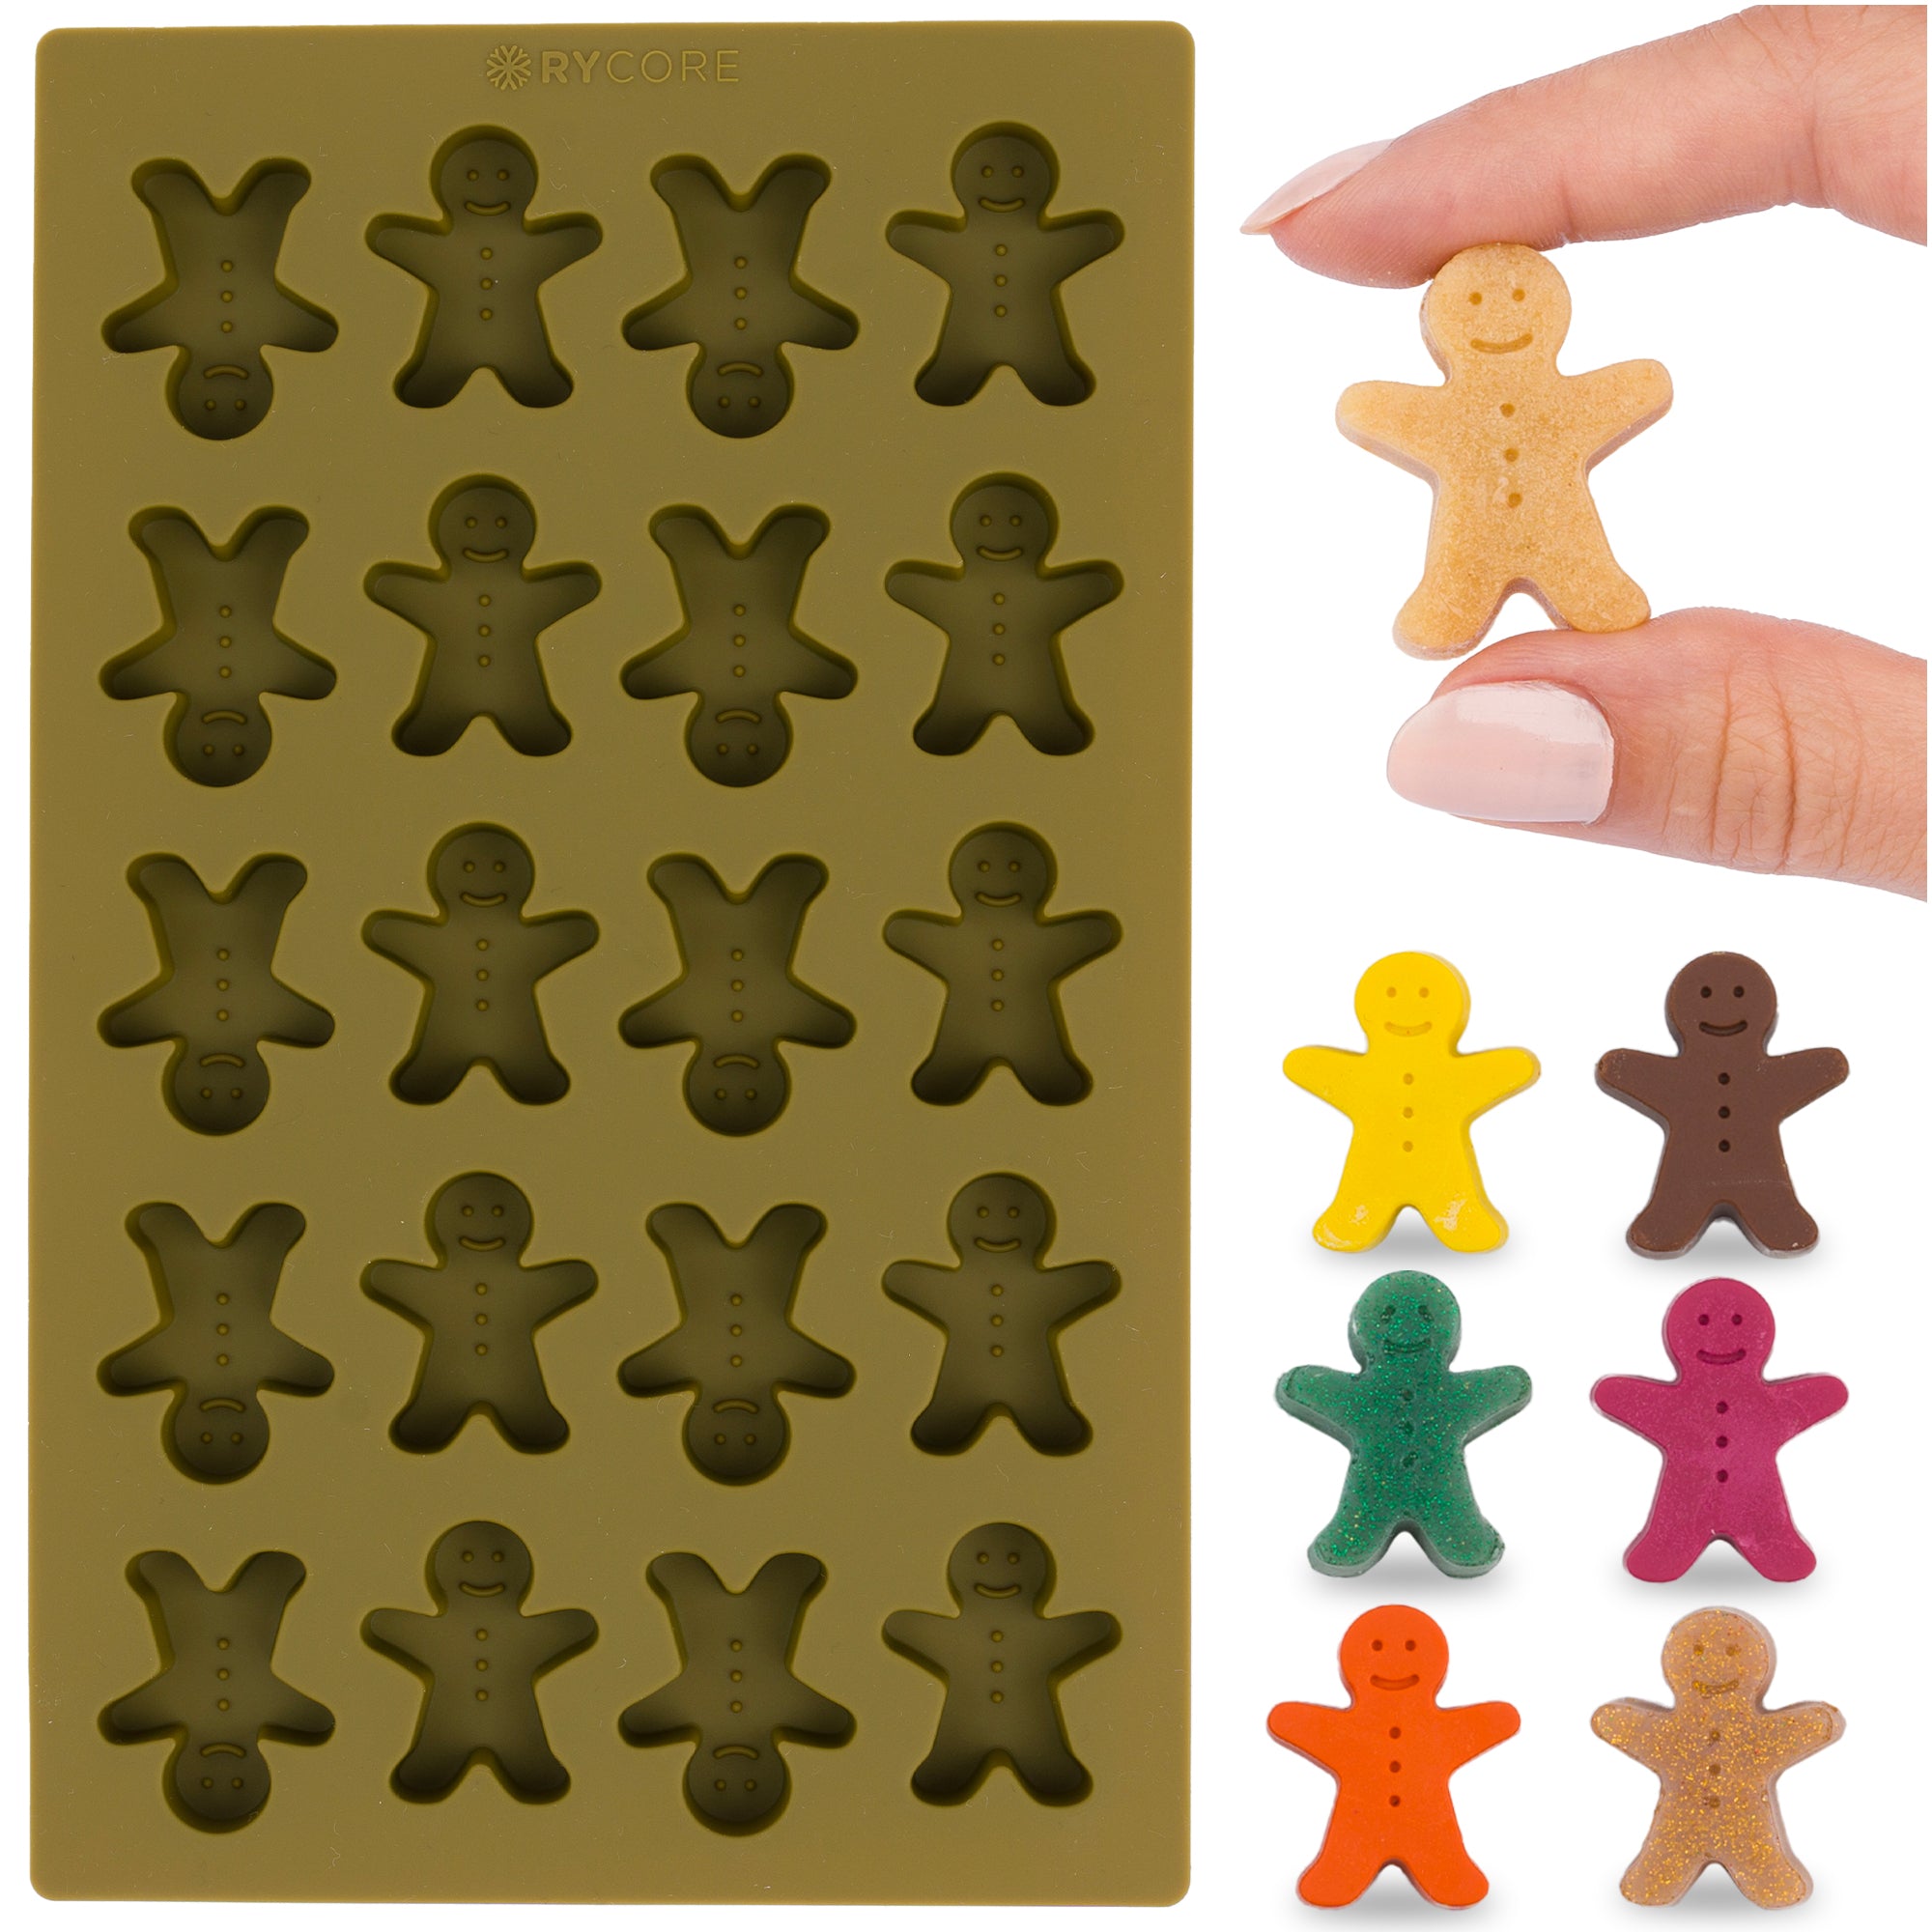 Mini Gingerbread Man Silicone Mold - Perfect for Baking Chocolates, Candies & Mini Gingerbread Man Cookies - Unique Gingerbread Man Mold Design for Holiday Desserts & Special Celebrations